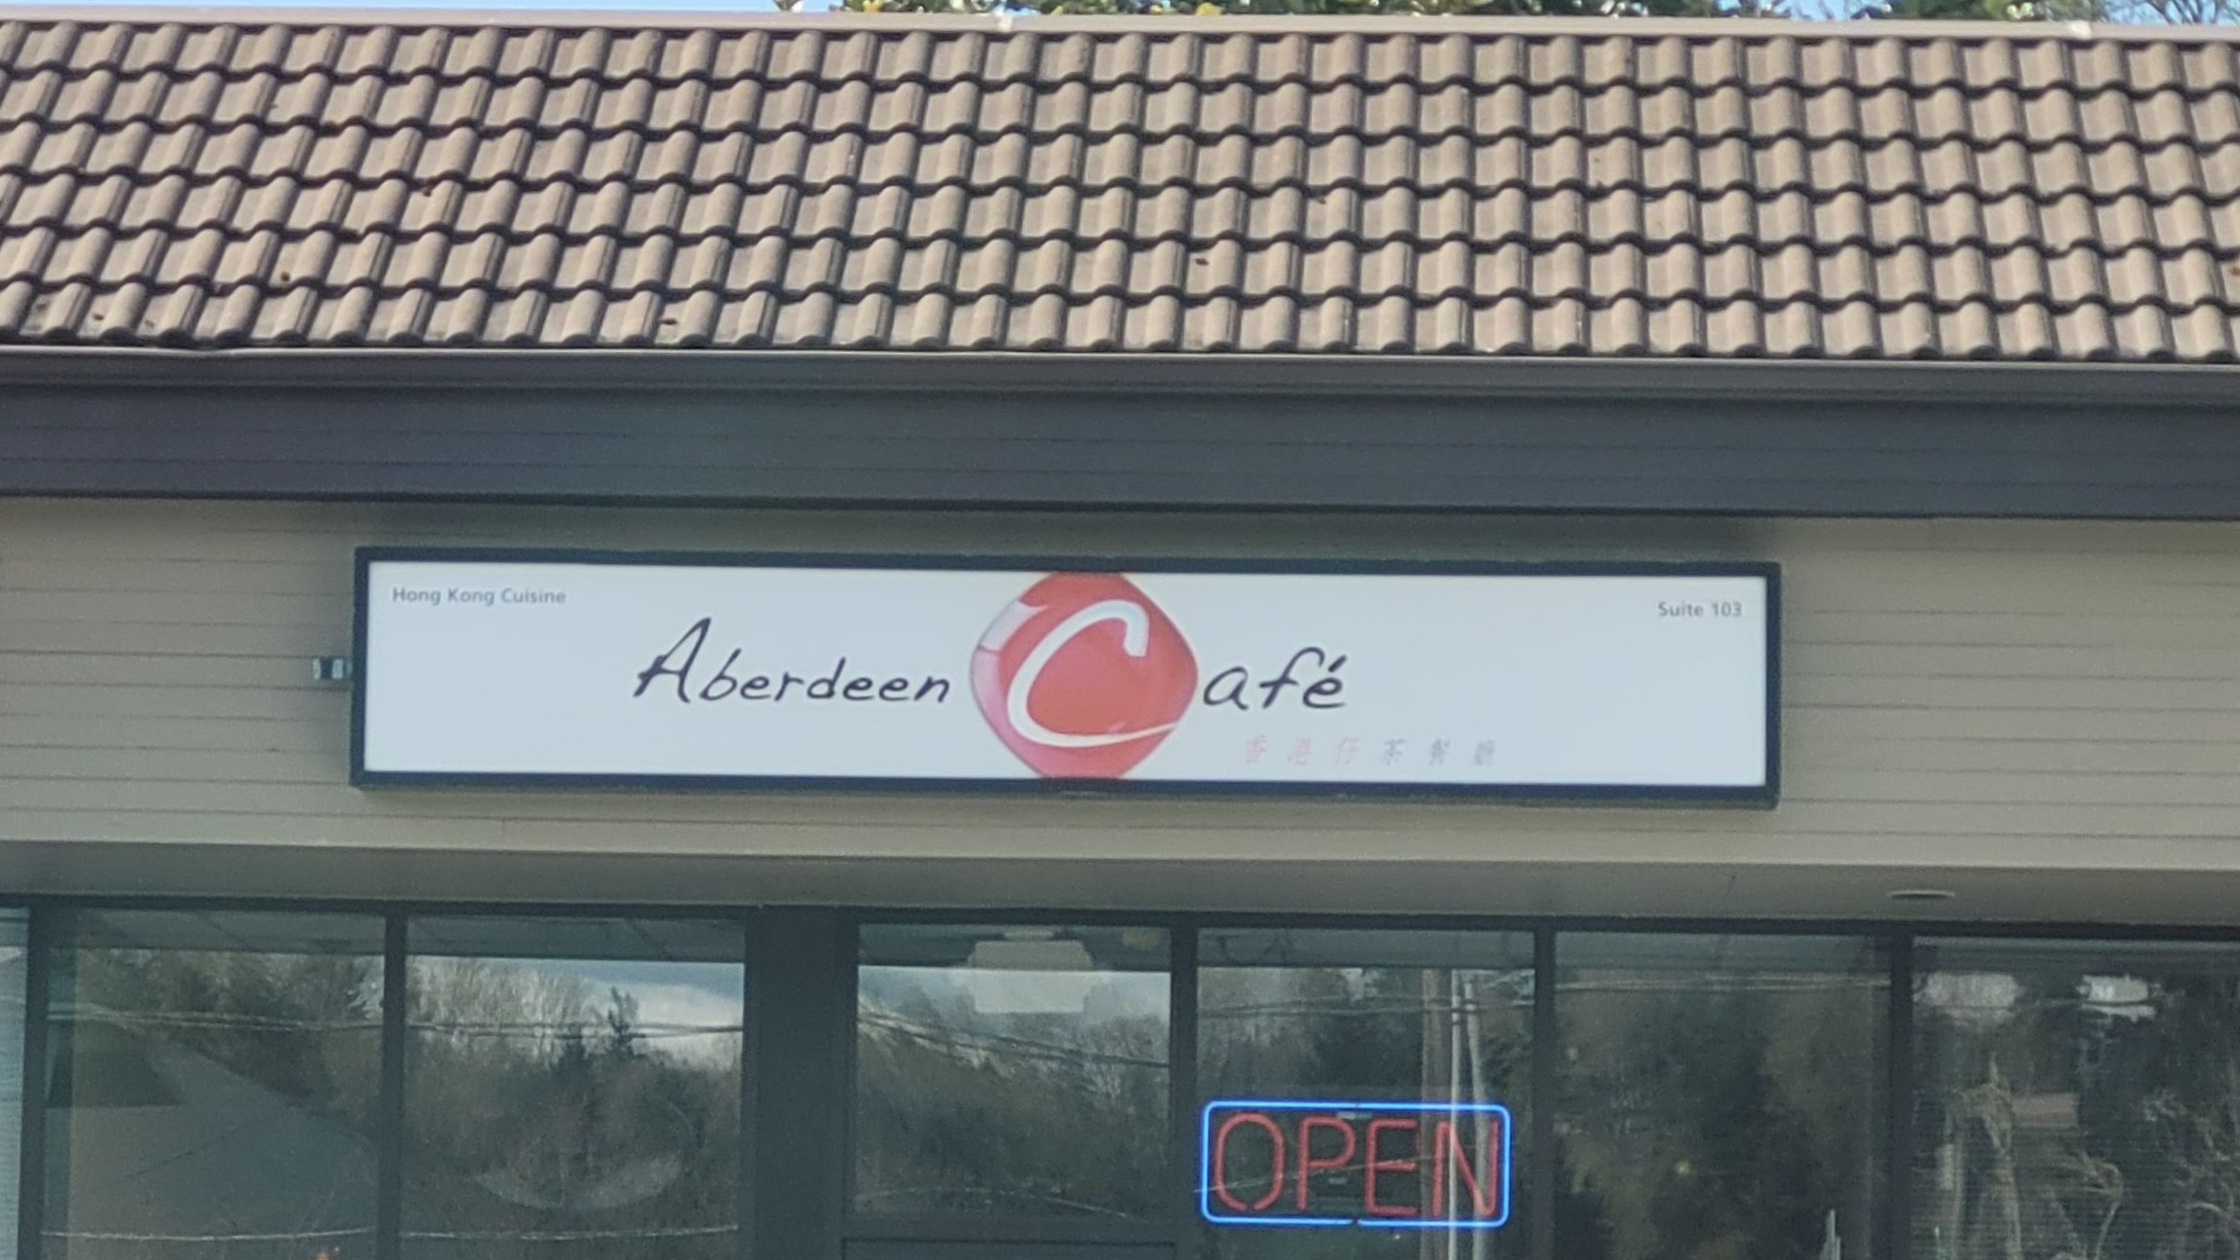 An overhead storefront sign for Aberdeen Cafe